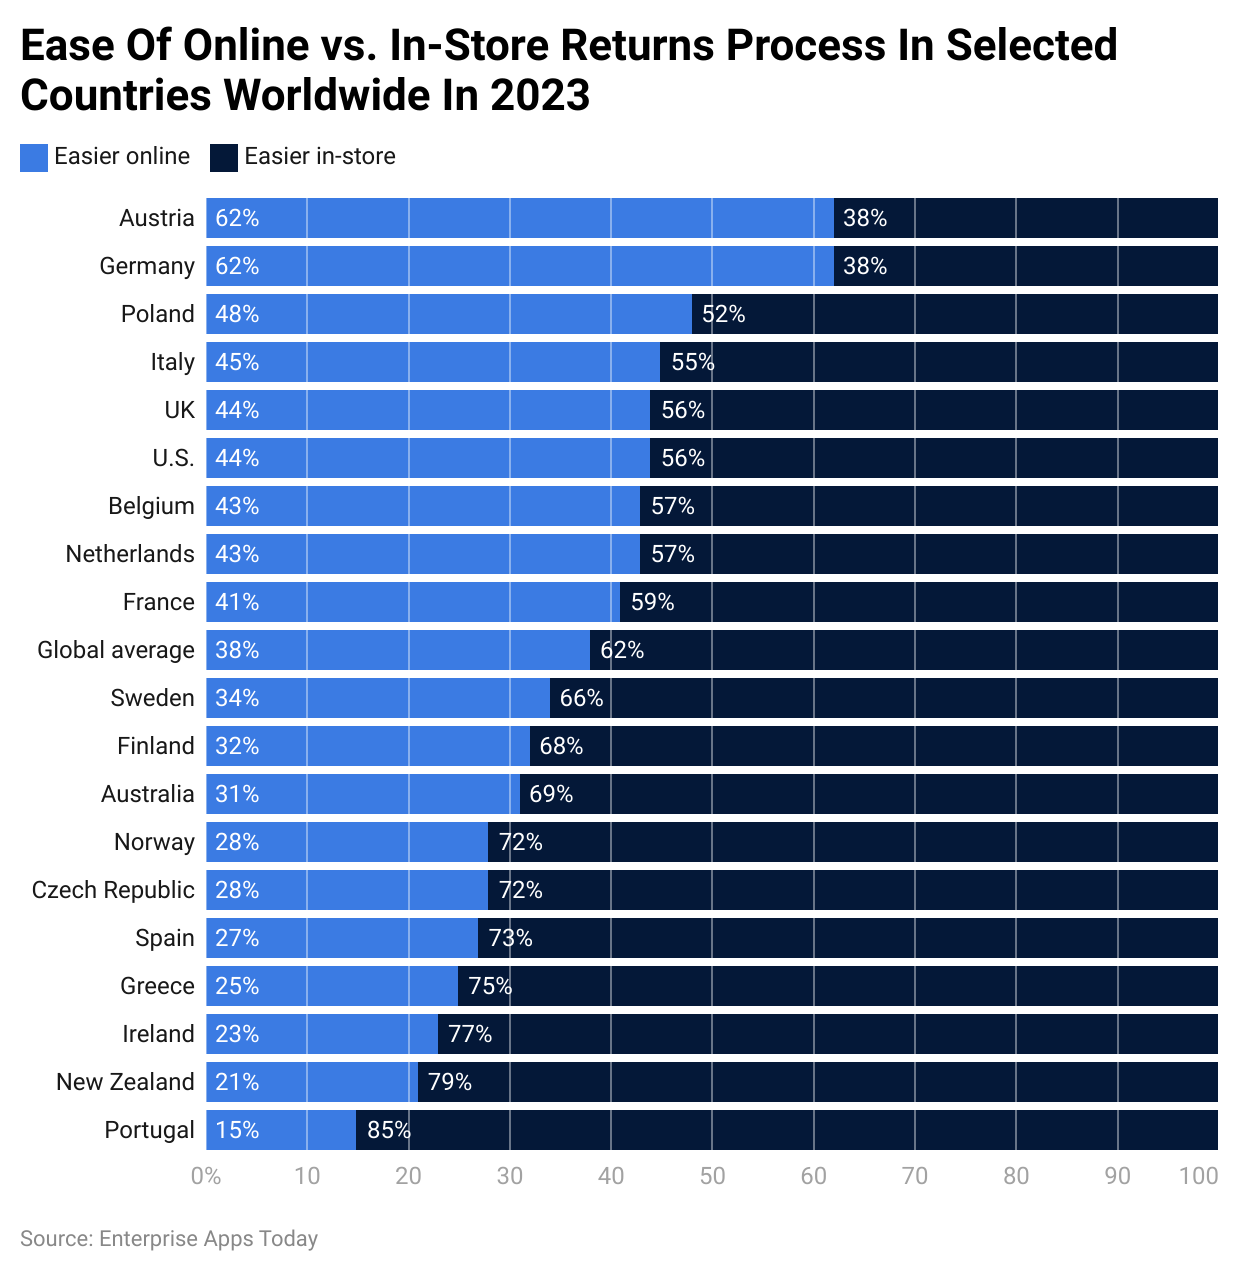 Ease of online vs. in-store returns process in selected countries worldwide in 2023